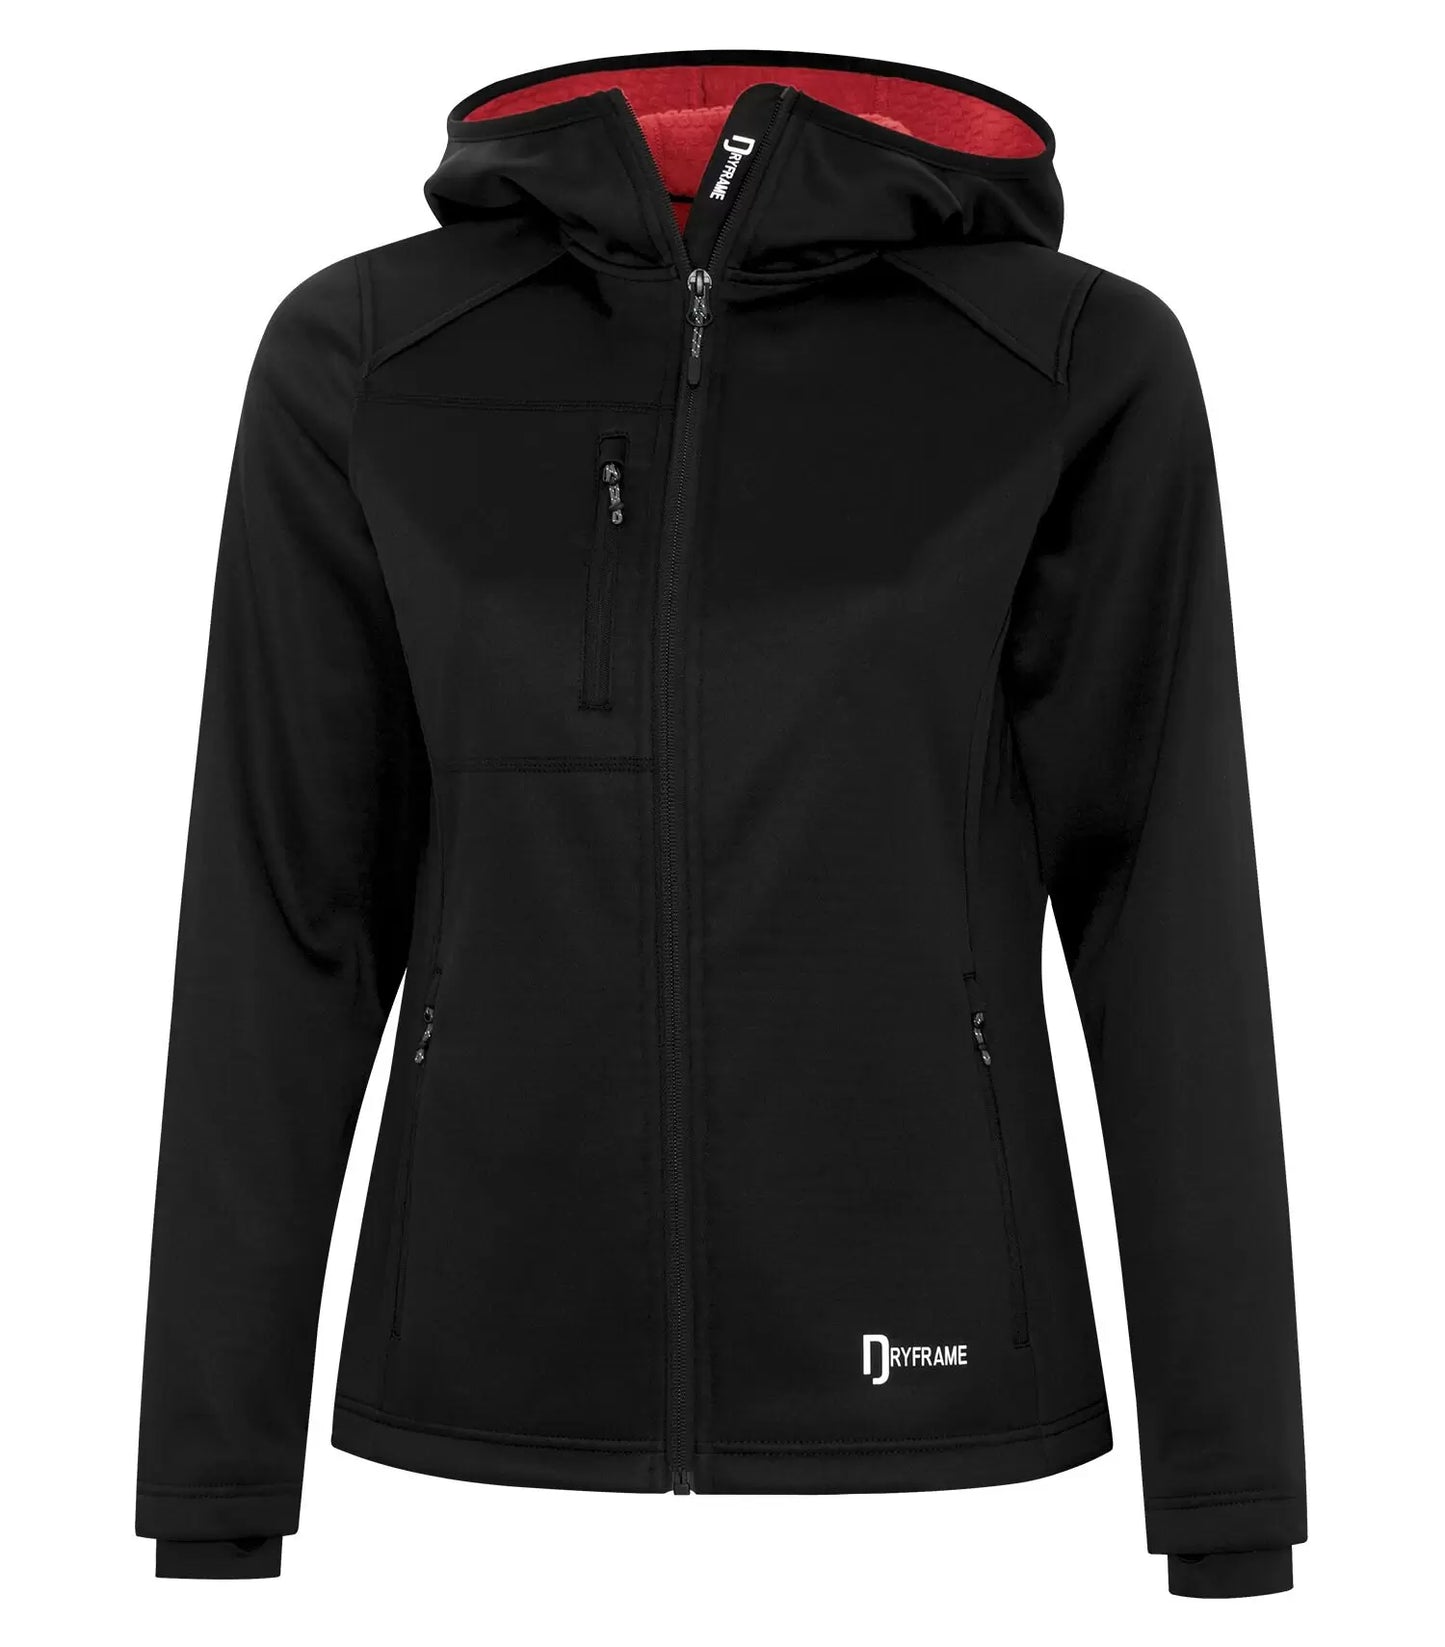 Dry Frame Jackets Mens & Womens